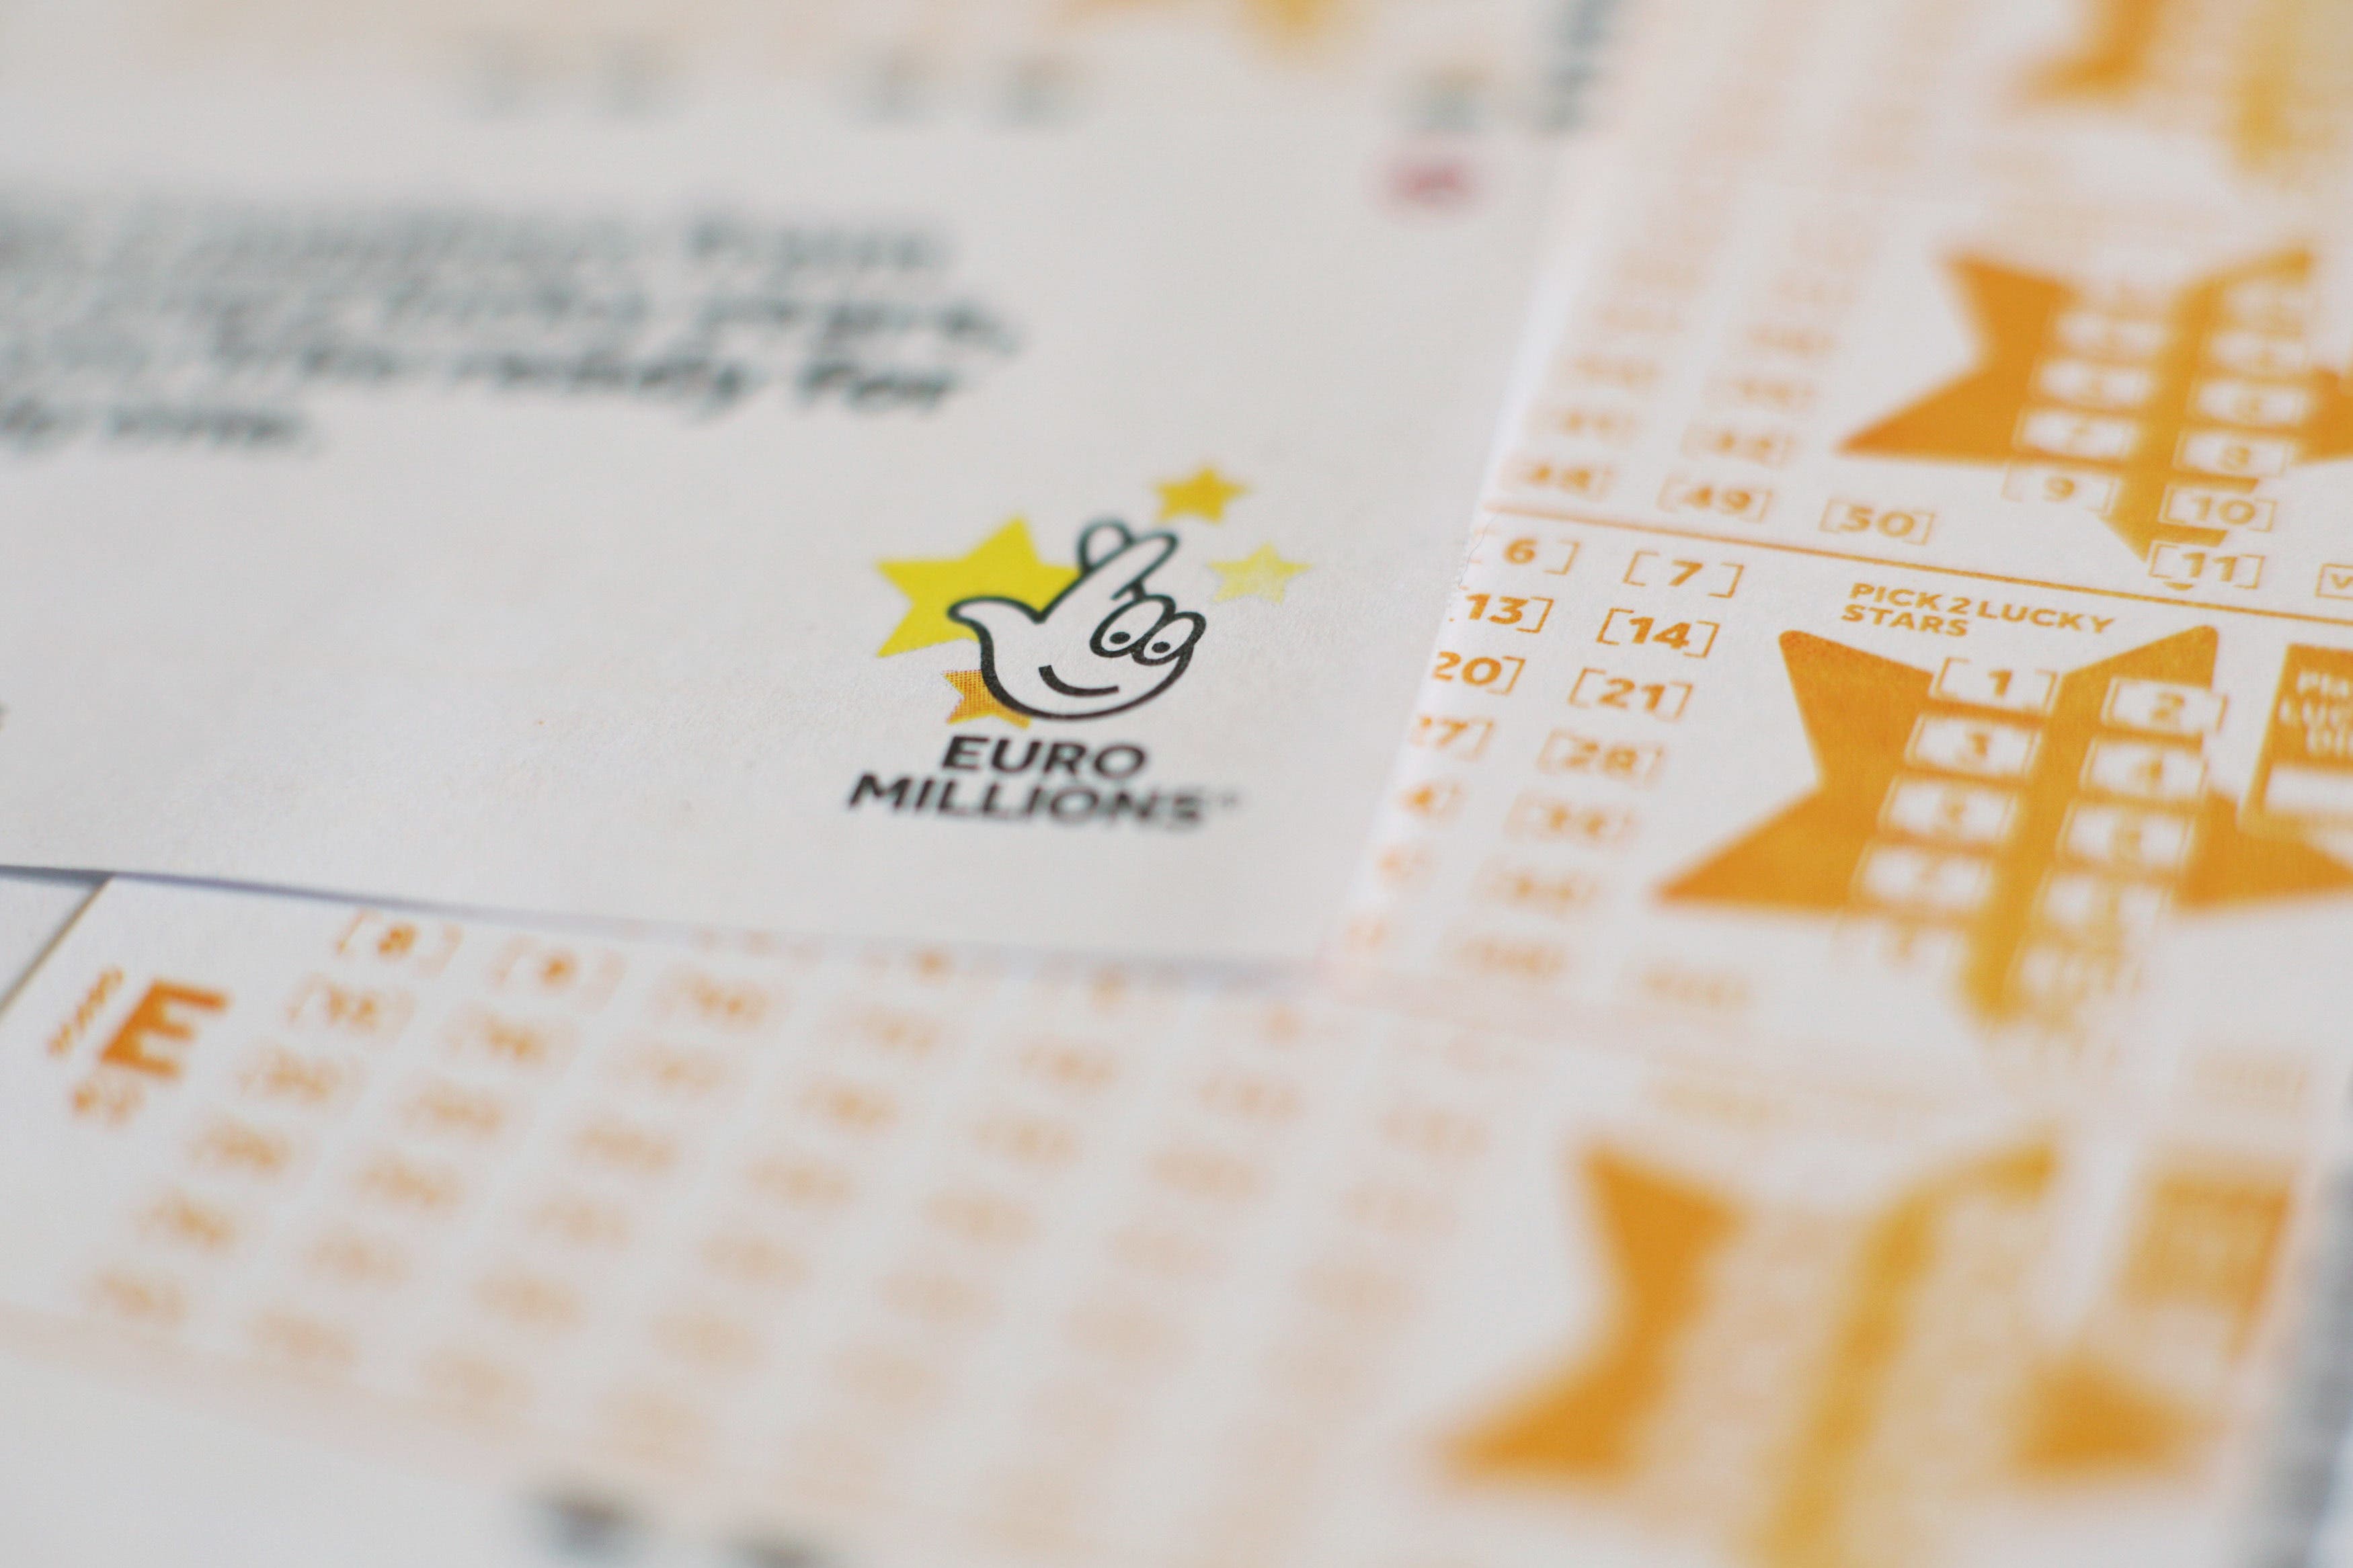 A lucky UK lottery ticket holder has bagged £61 million in Tuesday’s EuroMillions draw - but is yet to come forward to claim the winnings